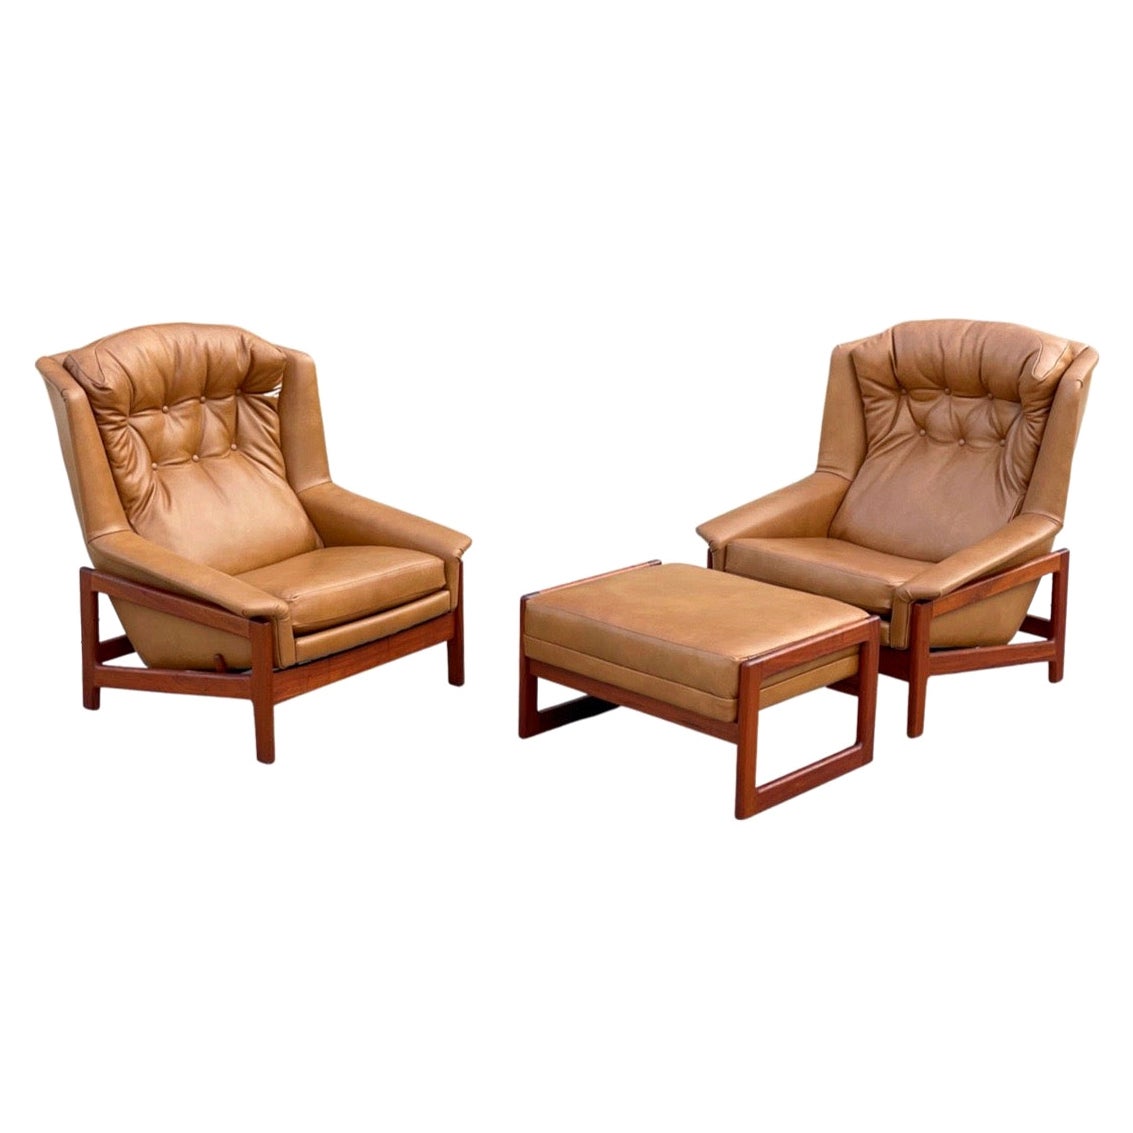 Midcentury Reclining Lounge Chairs in Leather + Walnut by Folke Ohlsson for DUX For Sale